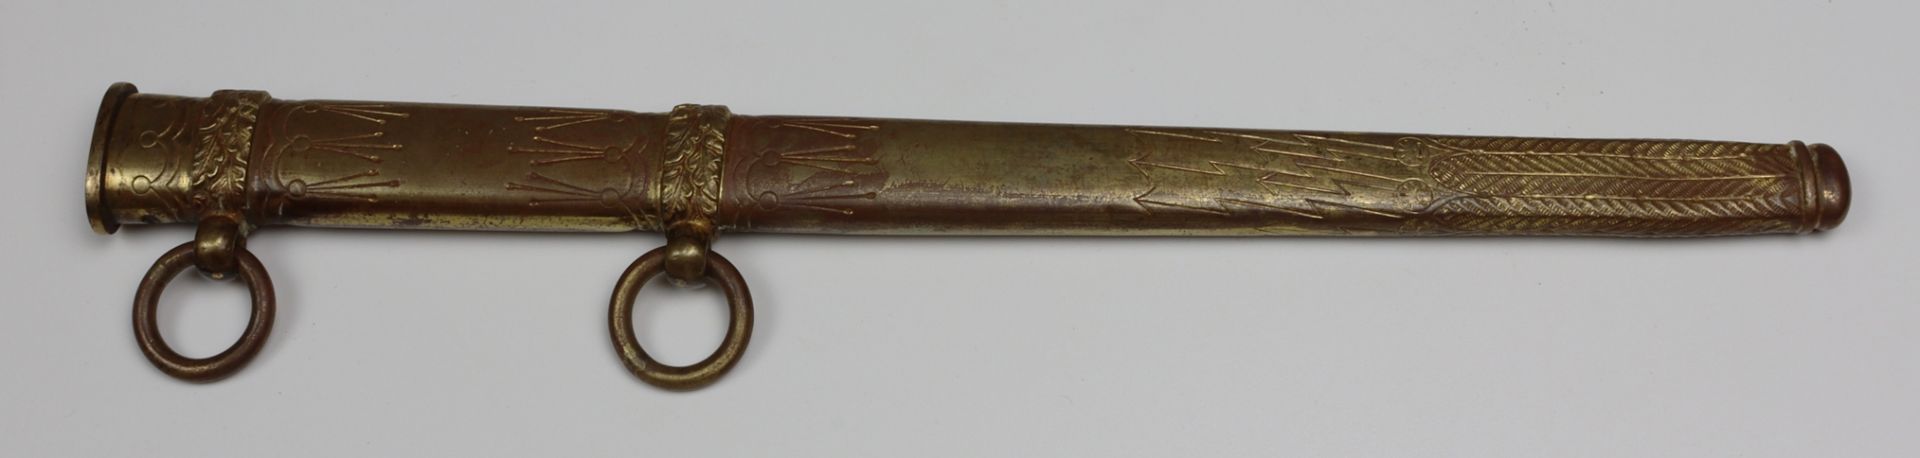 Dagger of the Kriegsmarine of the 3. Reich, 1933-1945 - Image 3 of 7